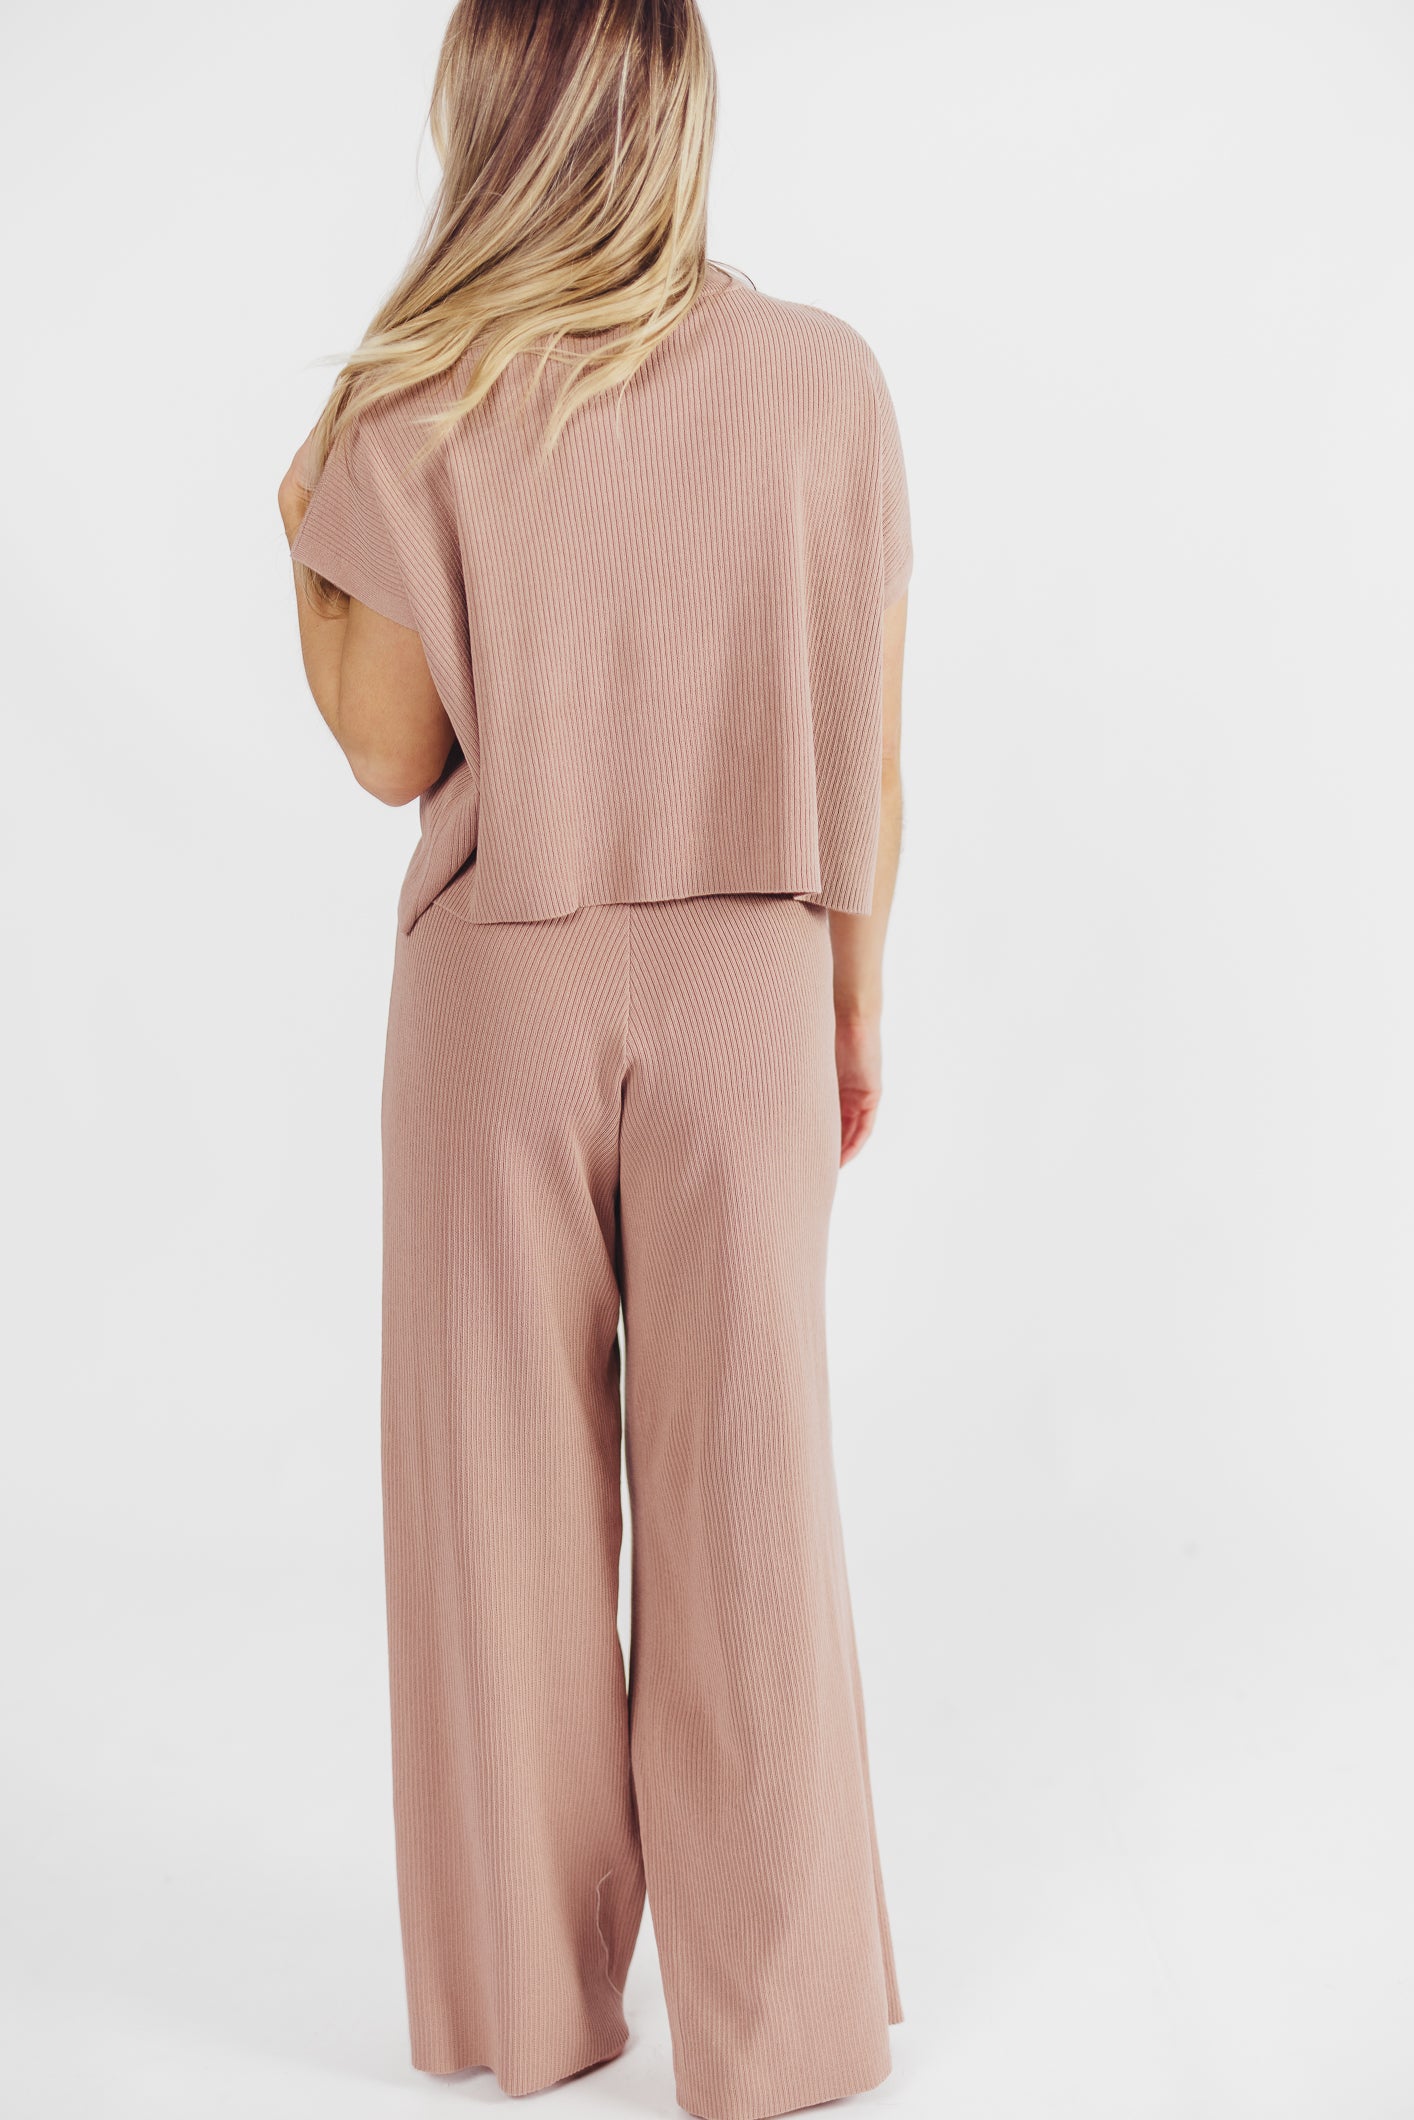 Tripp Knit Top and Pants Set in Chocolate